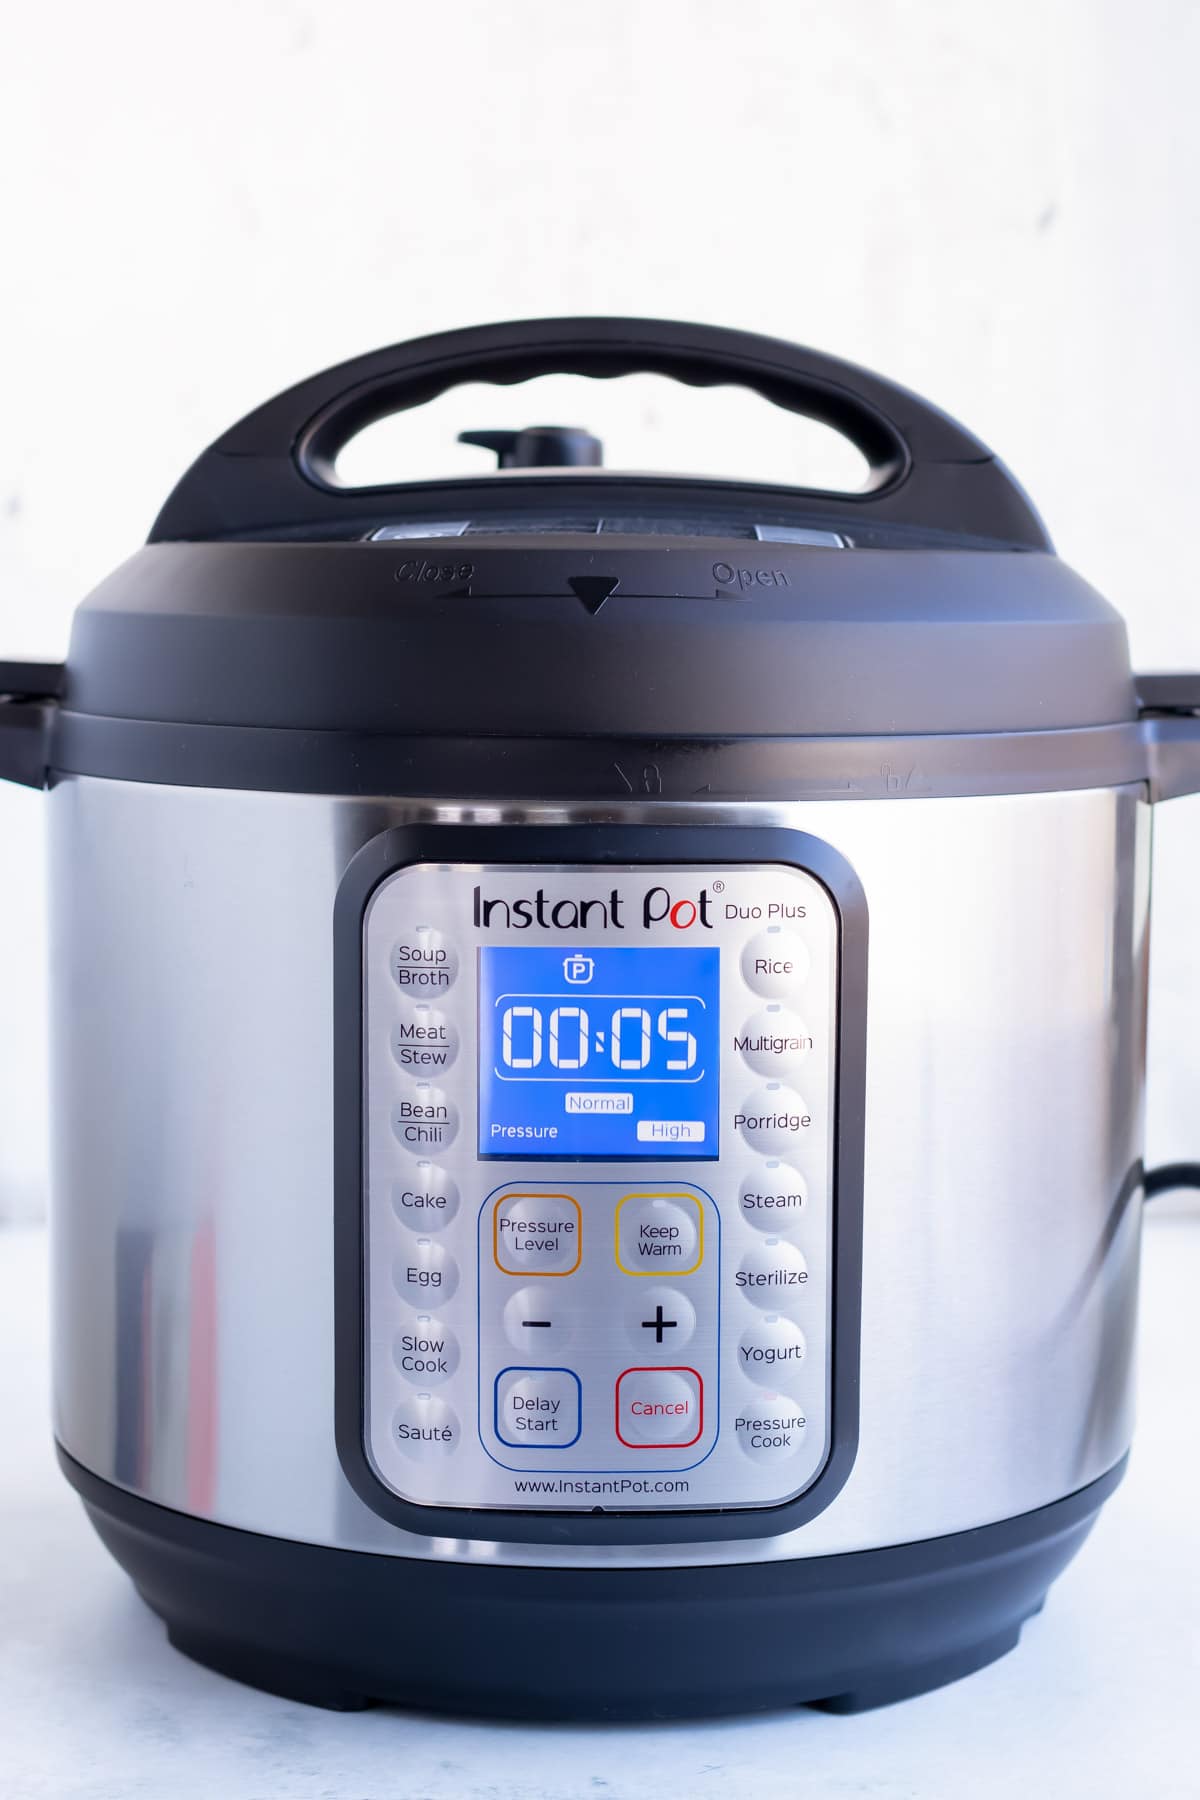 The instant pot timer being set for five minutes.